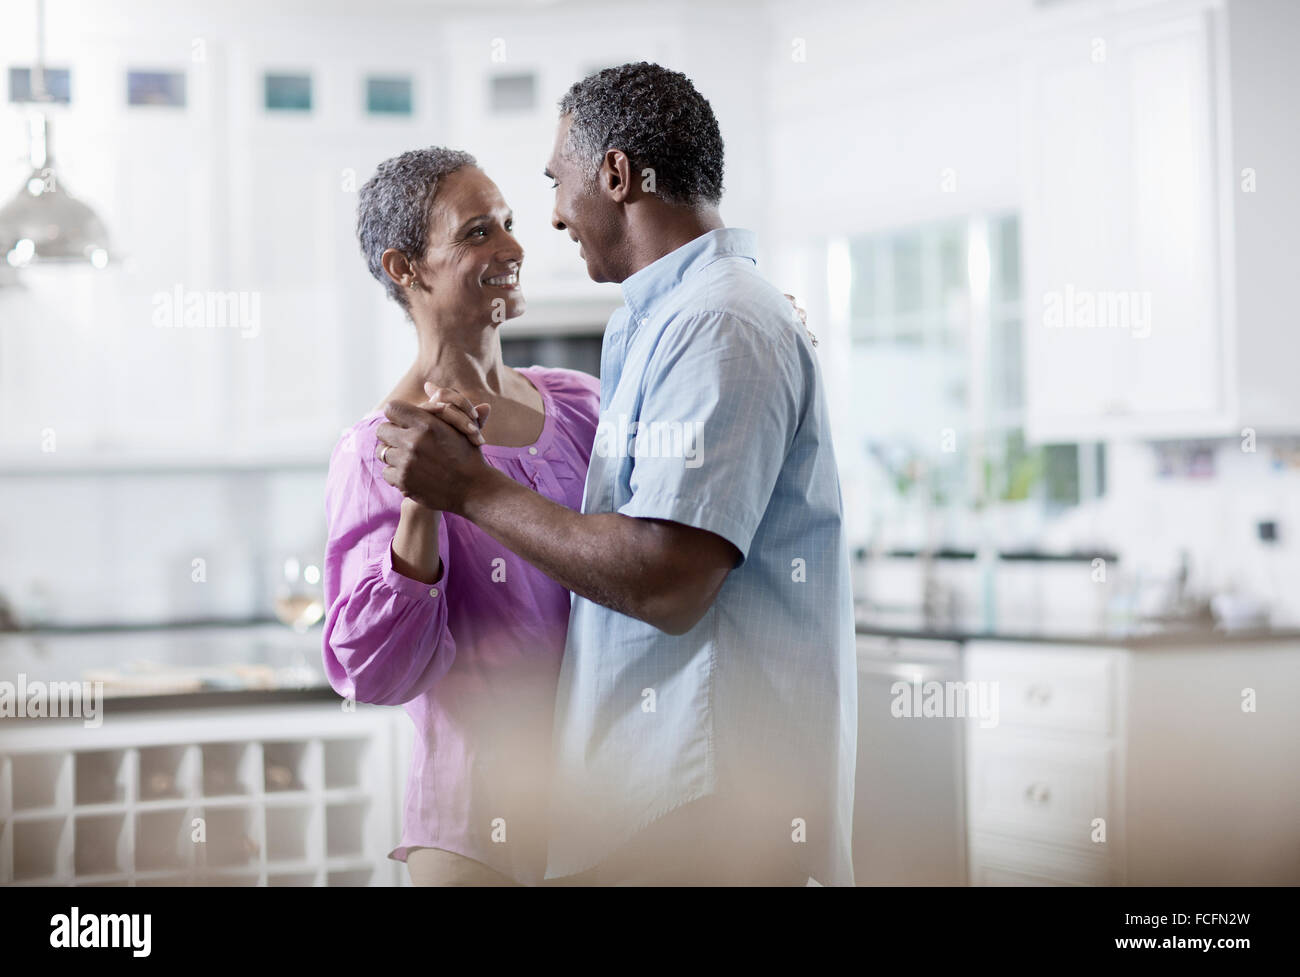 An affectionate mature African American couple, with their arms around each other dancing. Stock Photo